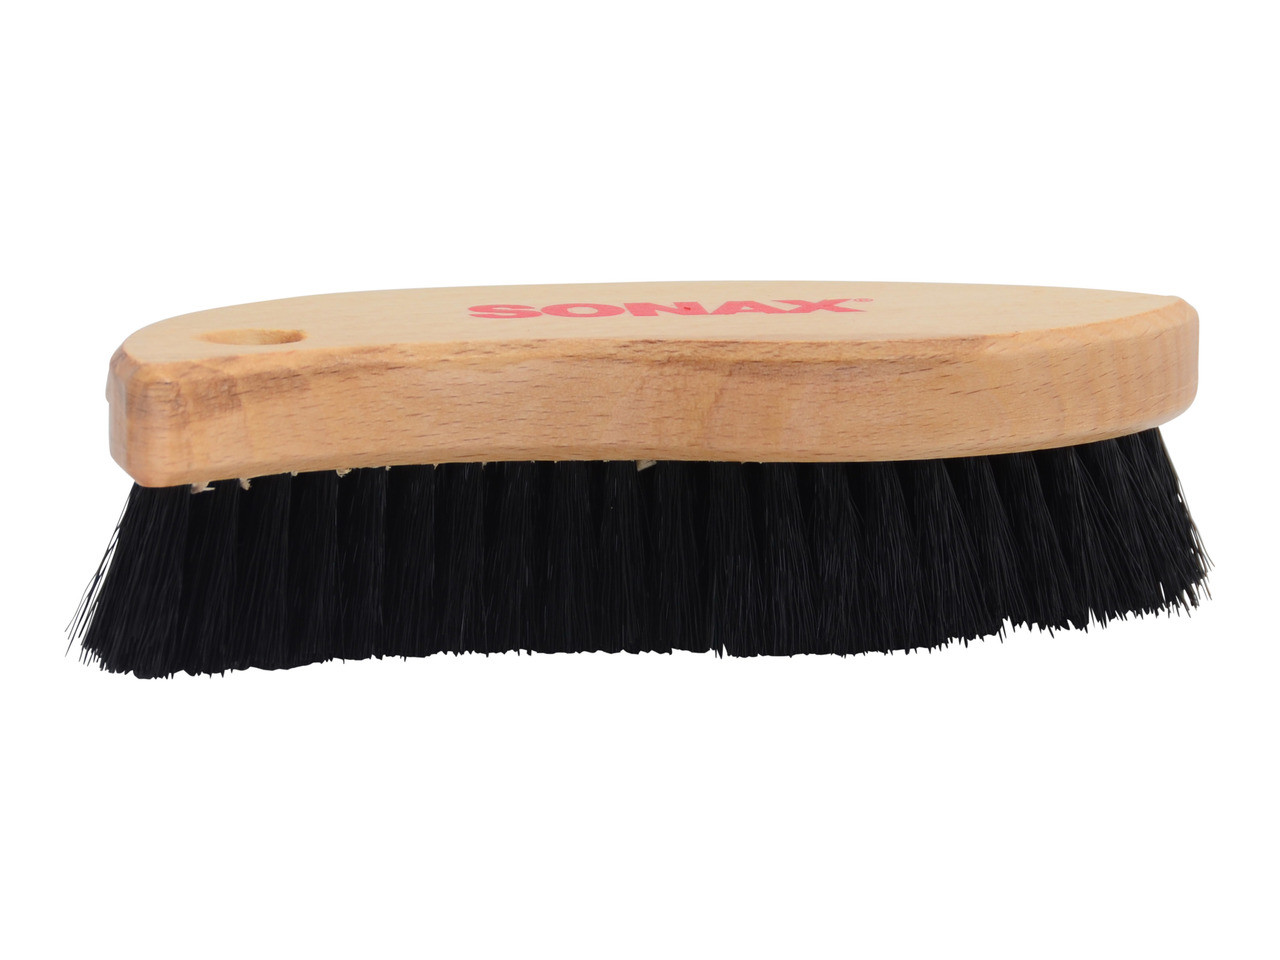 SONAX 4167410 Textile & Leather Brush for sale online